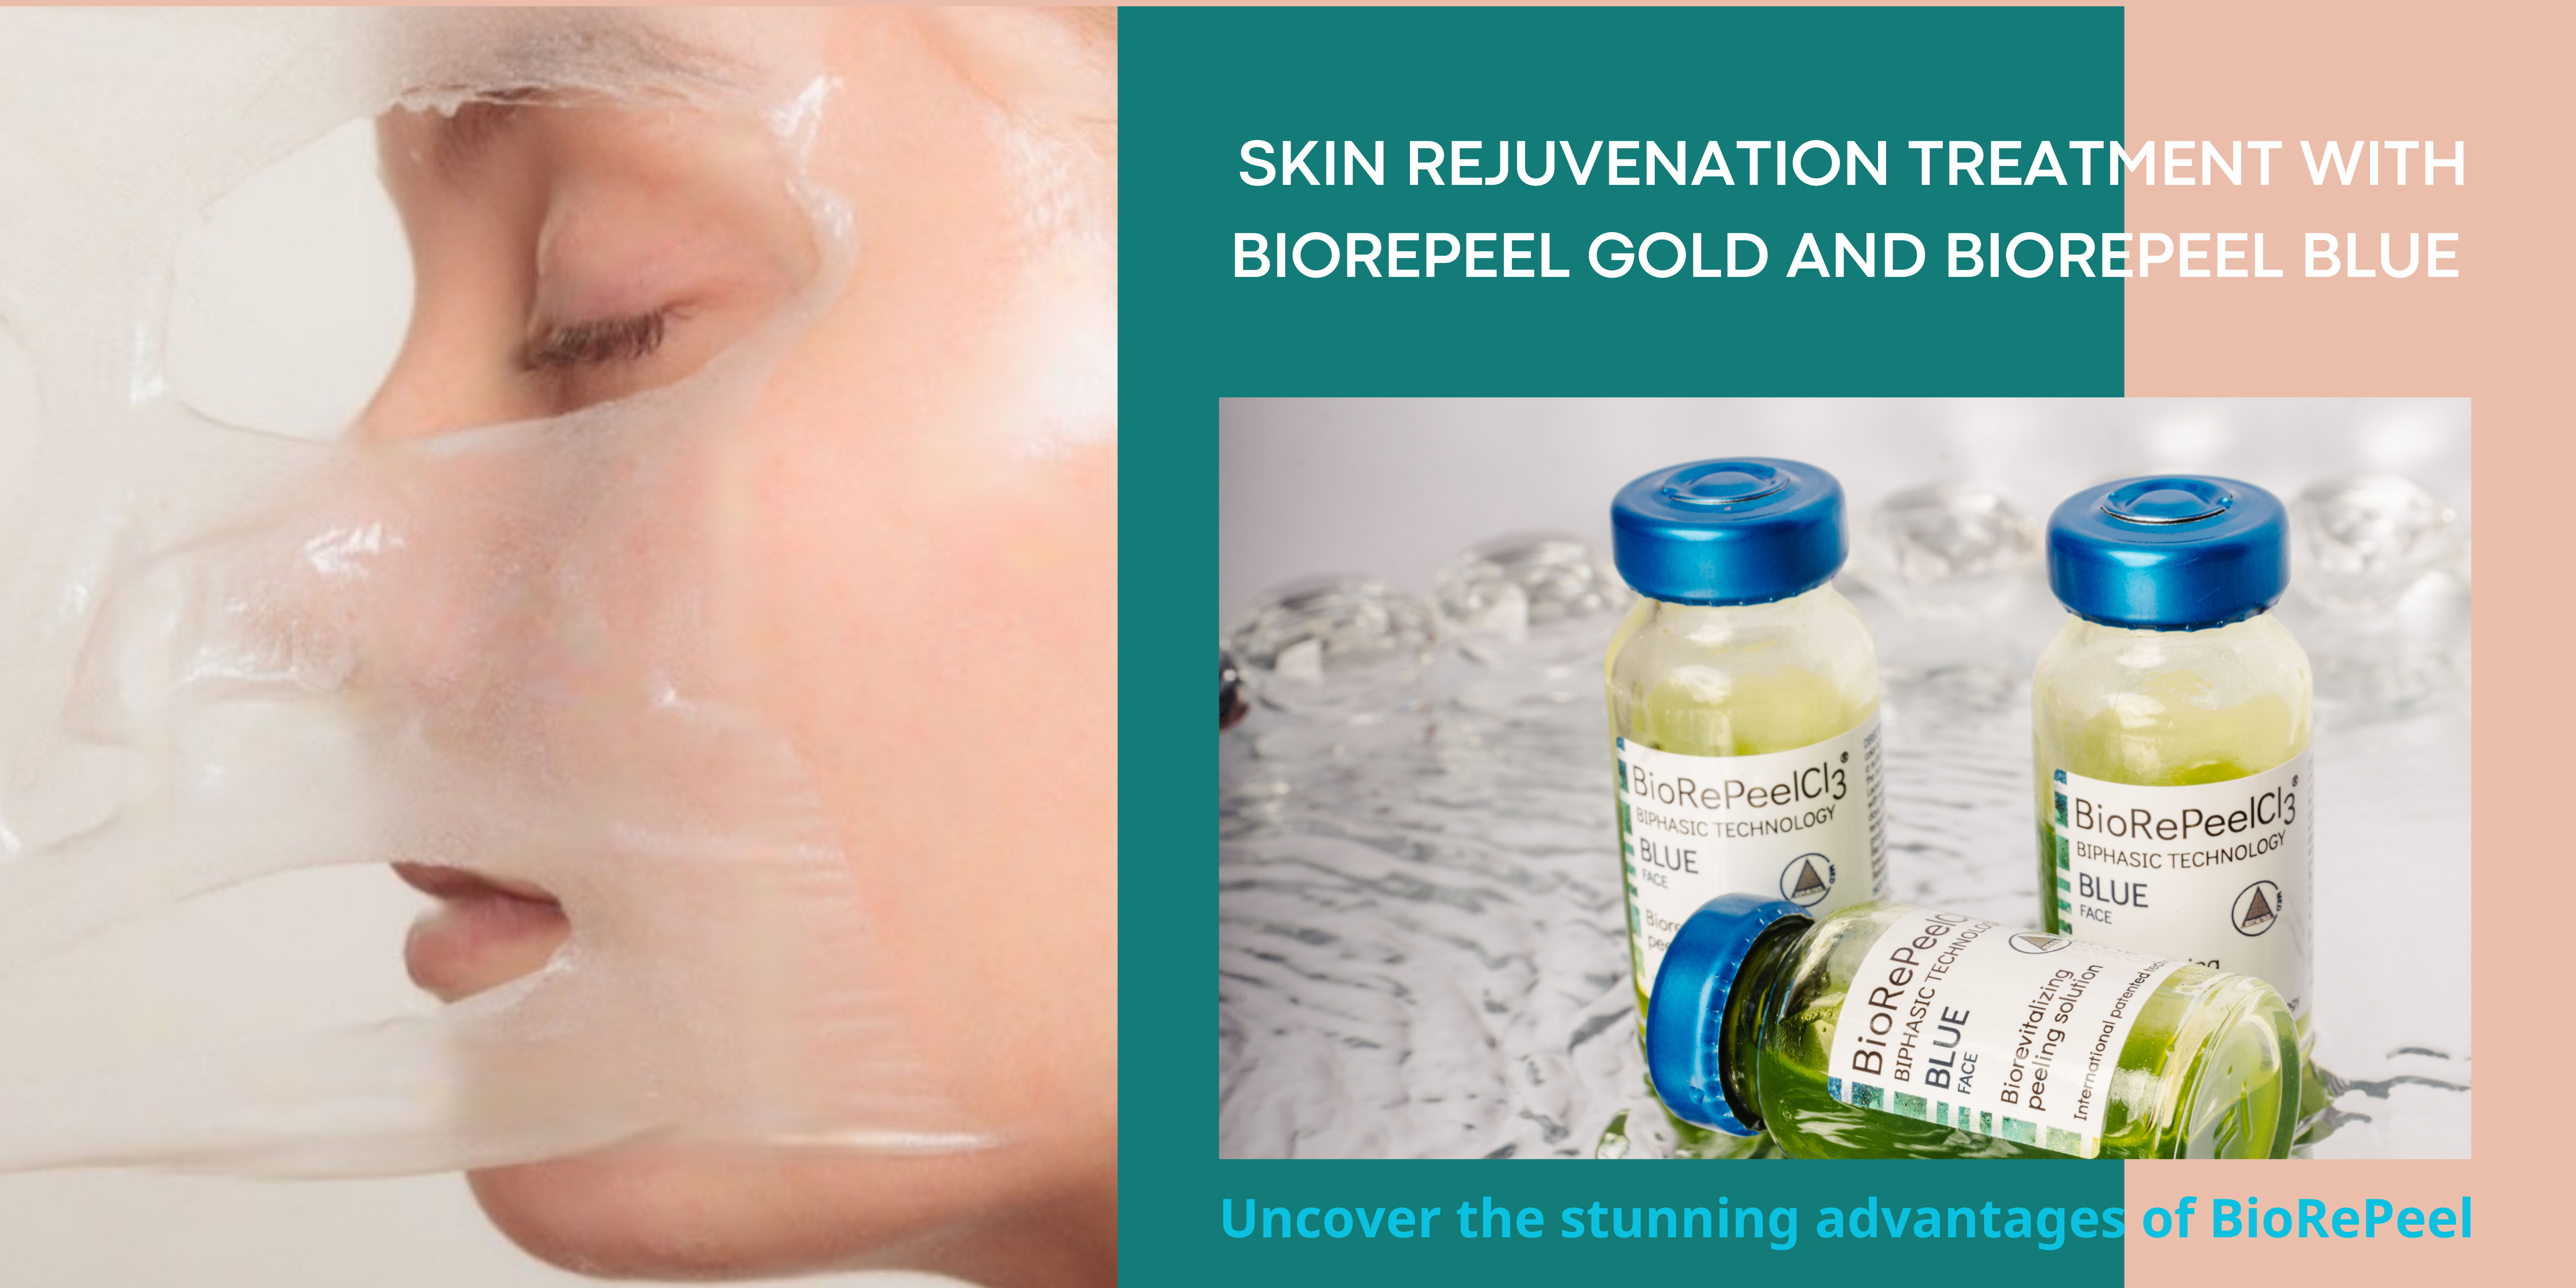 Featured image for “BioRePeel: The Ultimate Skin Rejuvenation Treatment”